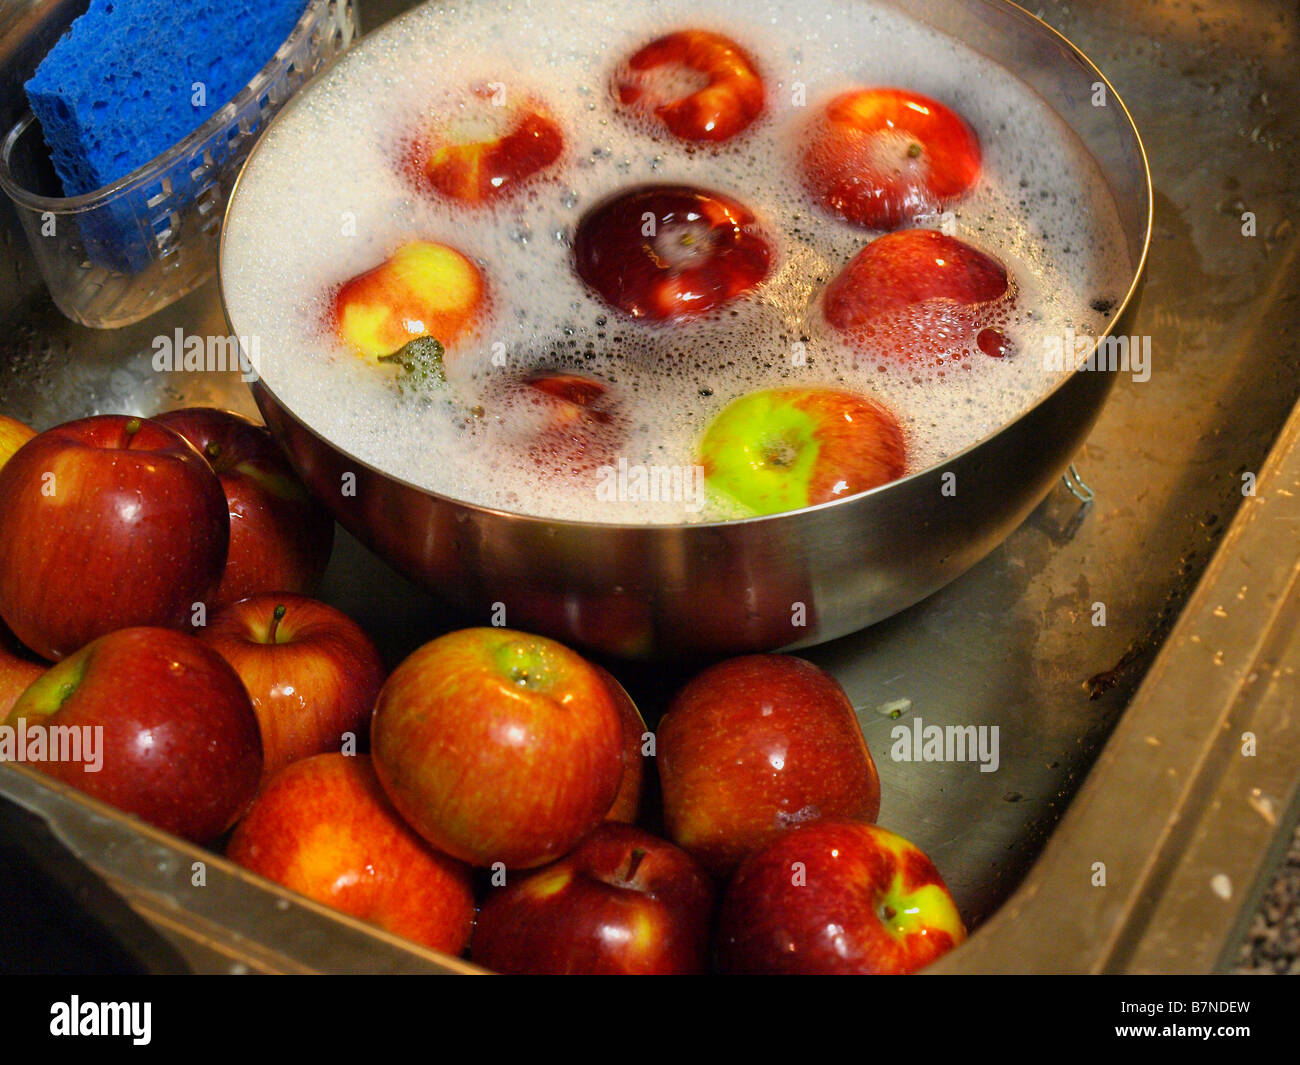 Freshly picked apples in a stainless steel bowl and kitchen sink being washed and prepared for eating or cooking. Stock Photo